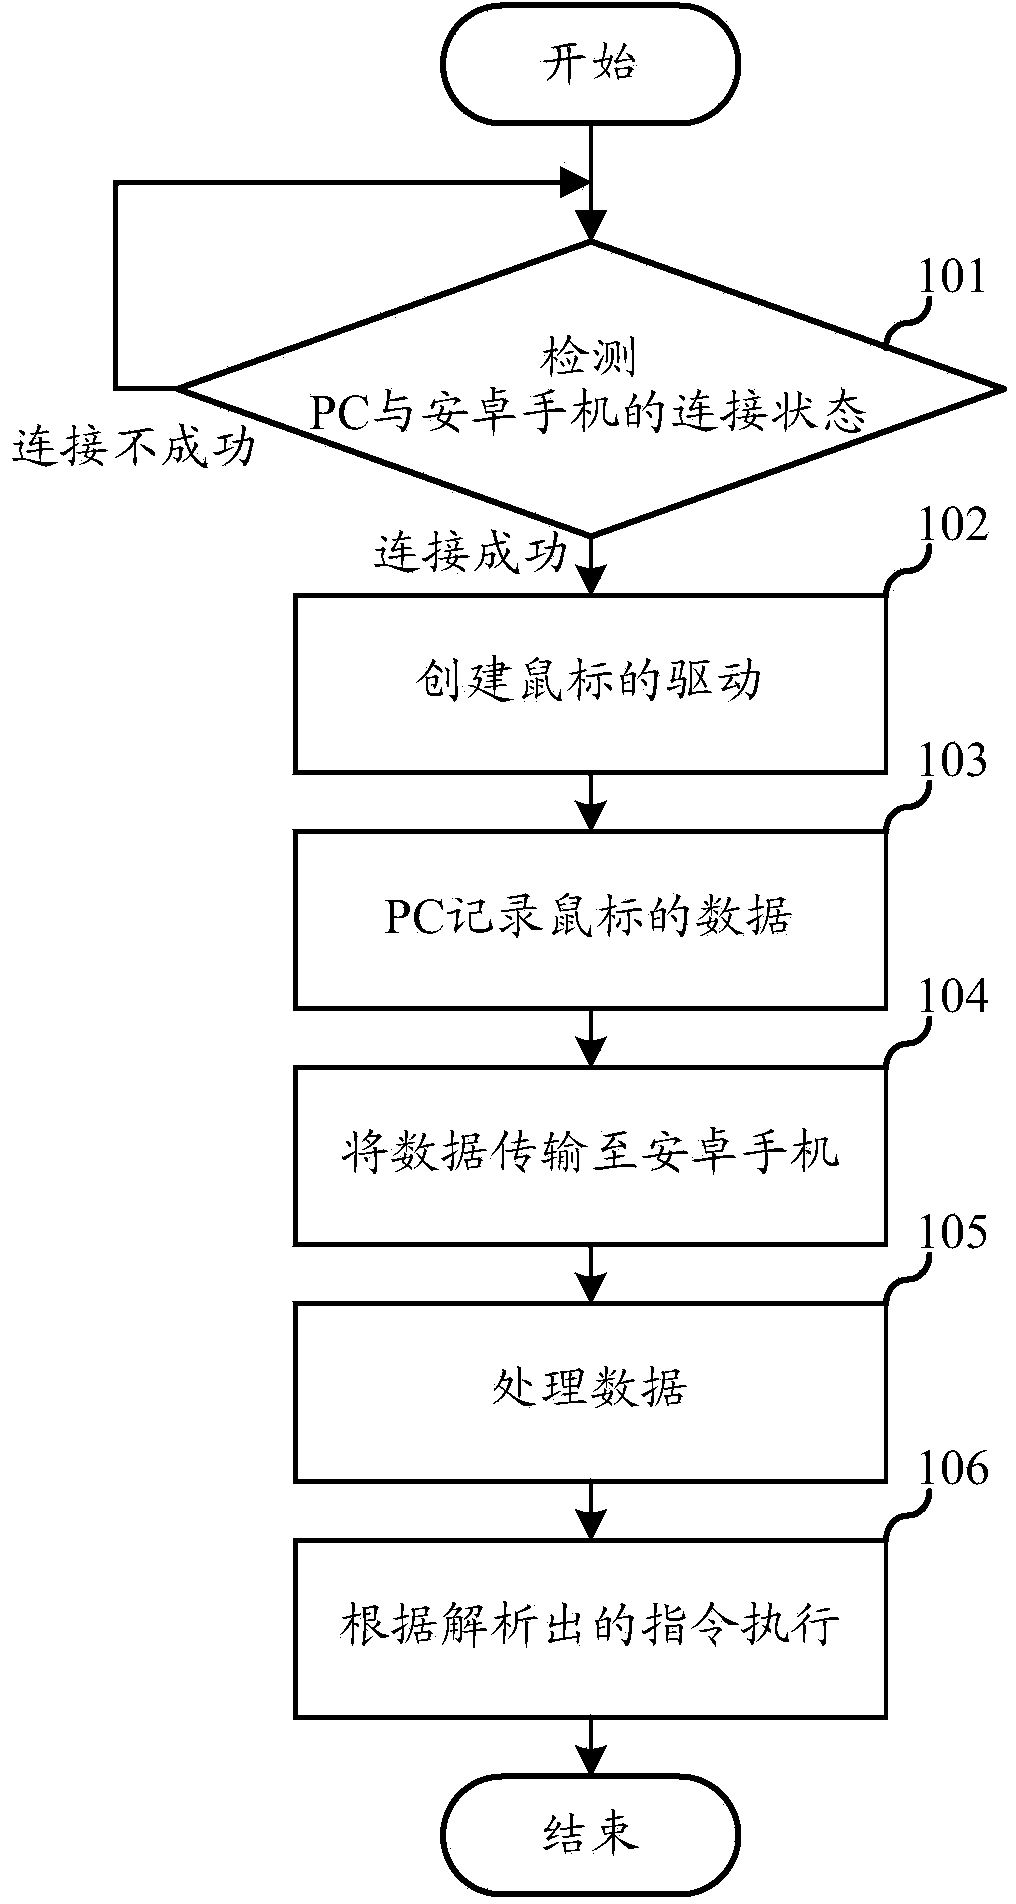 Method and device for sharing input device of PC (personal computer) with Android device